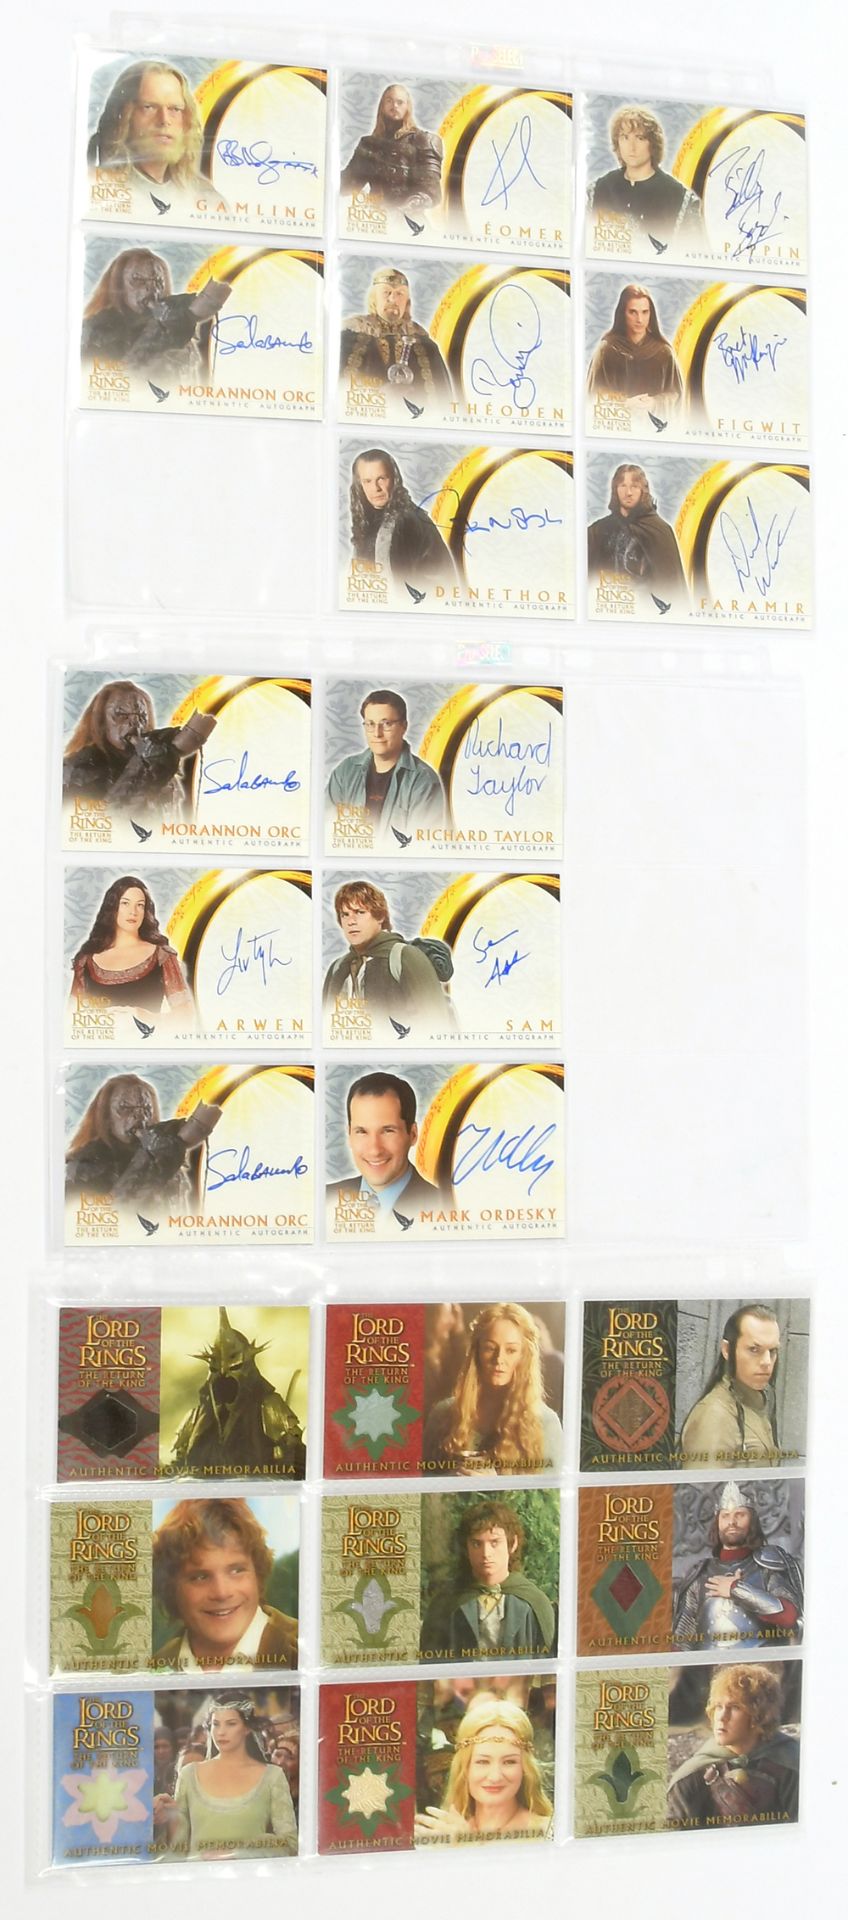 GRP inc Topps The Lord of the Rings Autograph - Image 3 of 9